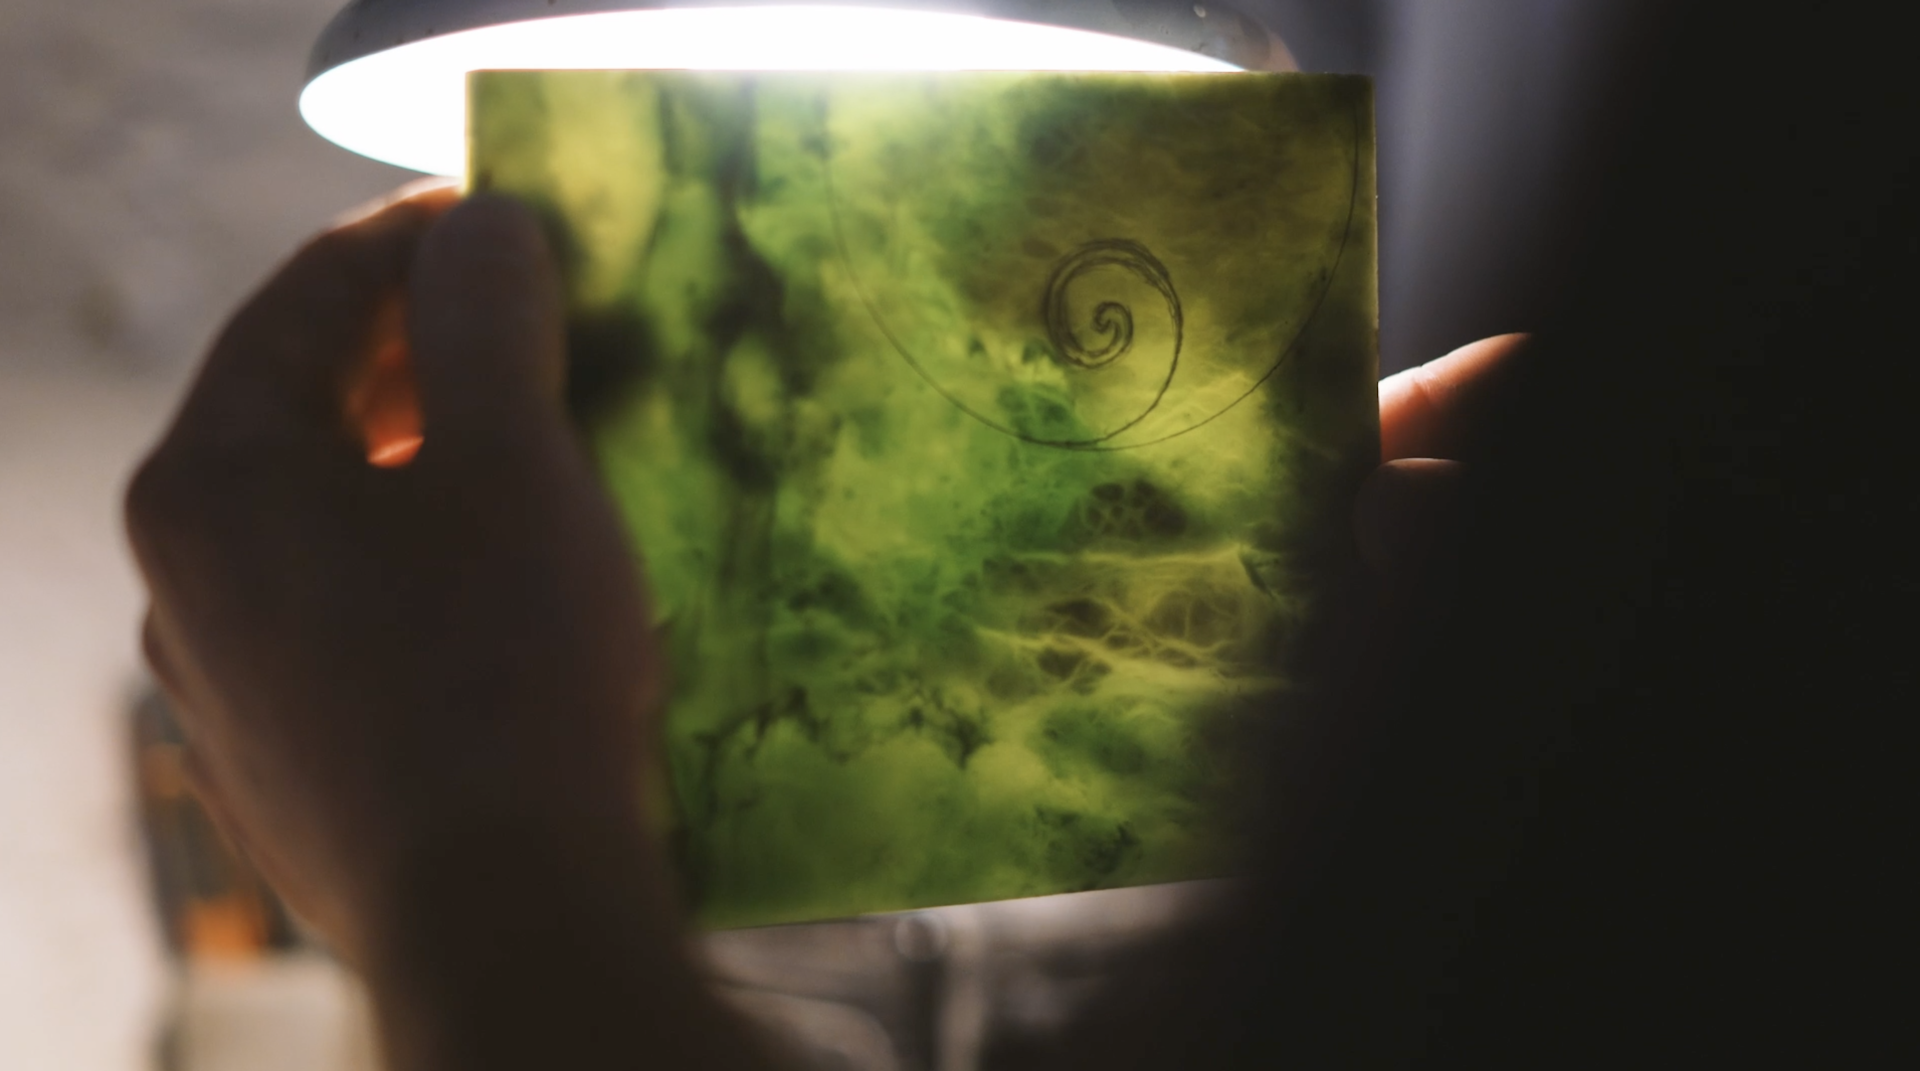 Two hands hold a piece of green stone up towards the light. A swirl shape has been drawn on